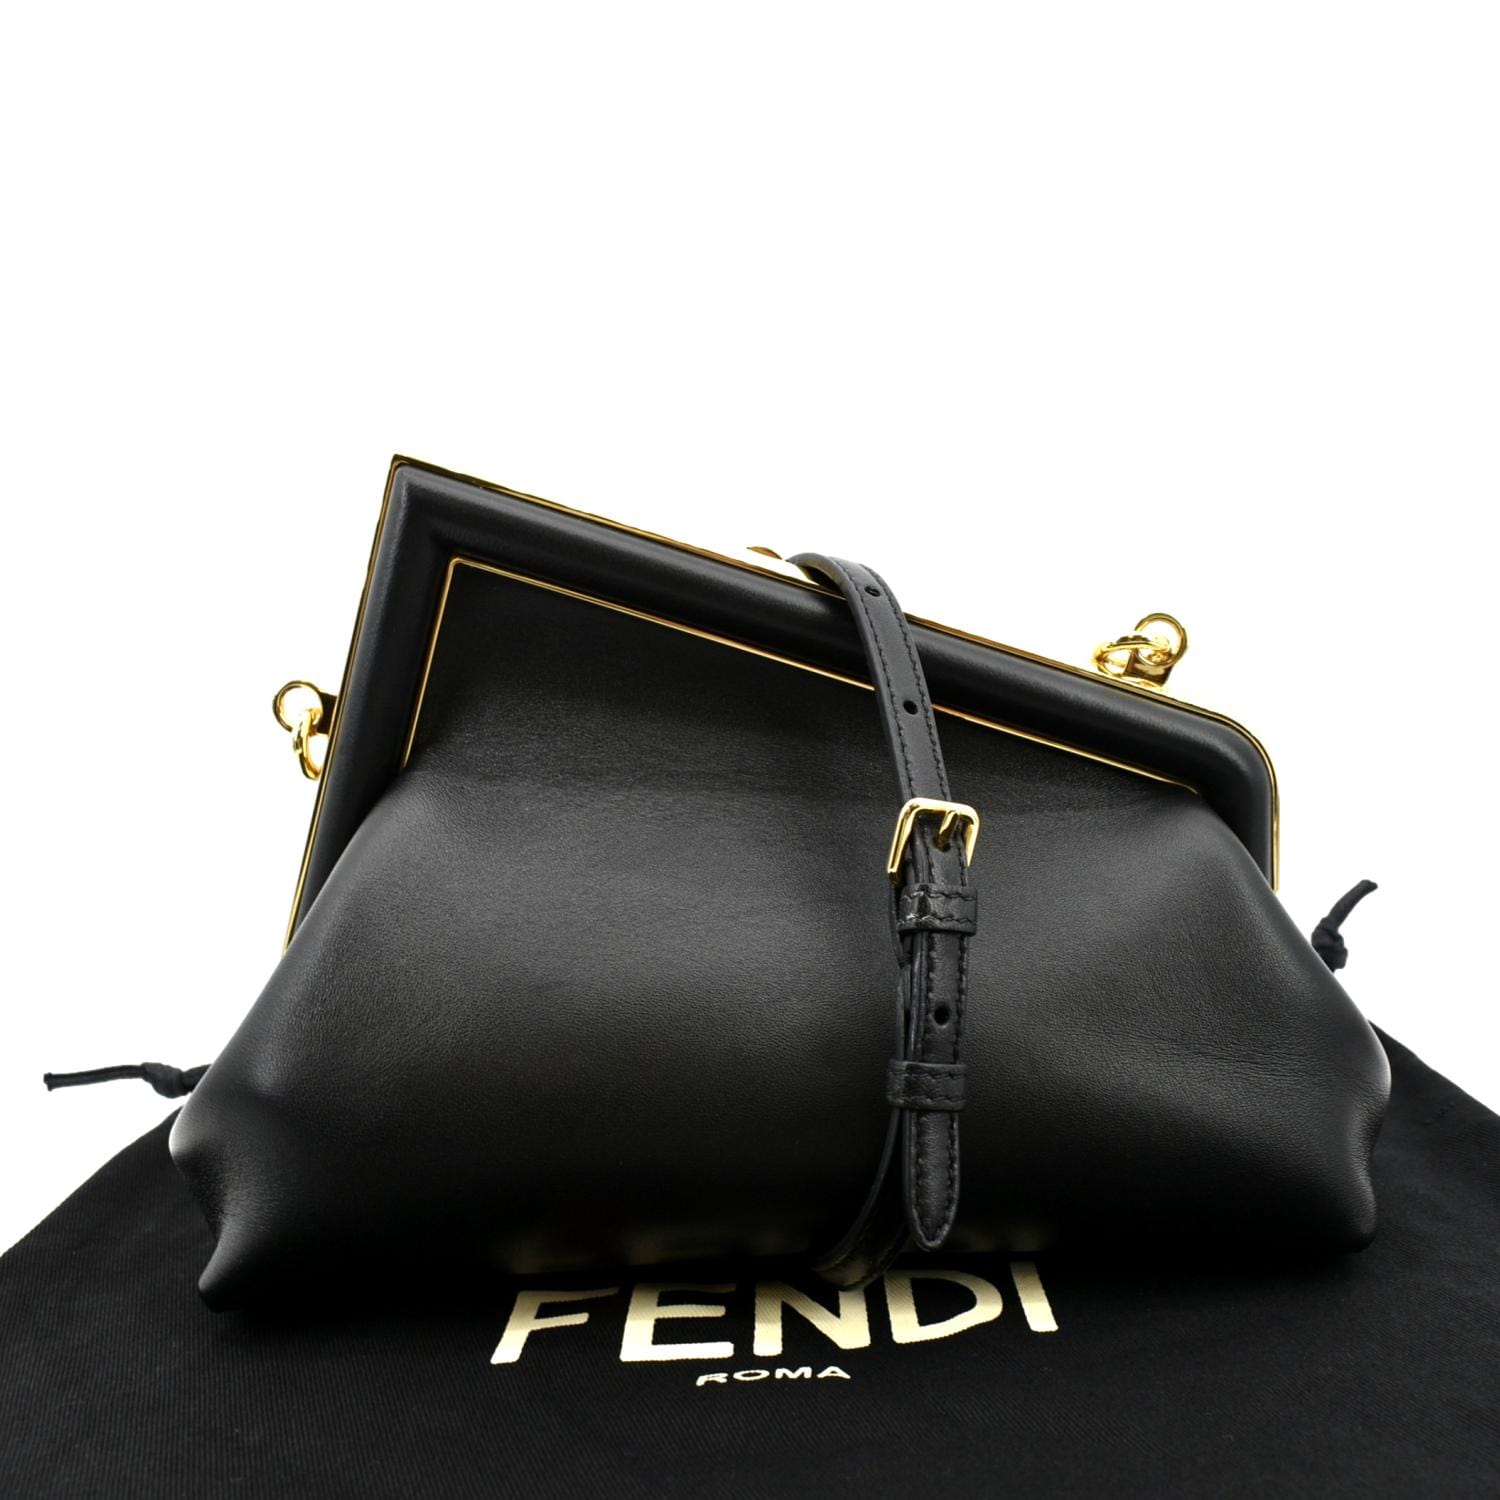 Fendi Ladies Bags, For Office, Size: 8/5 Inch